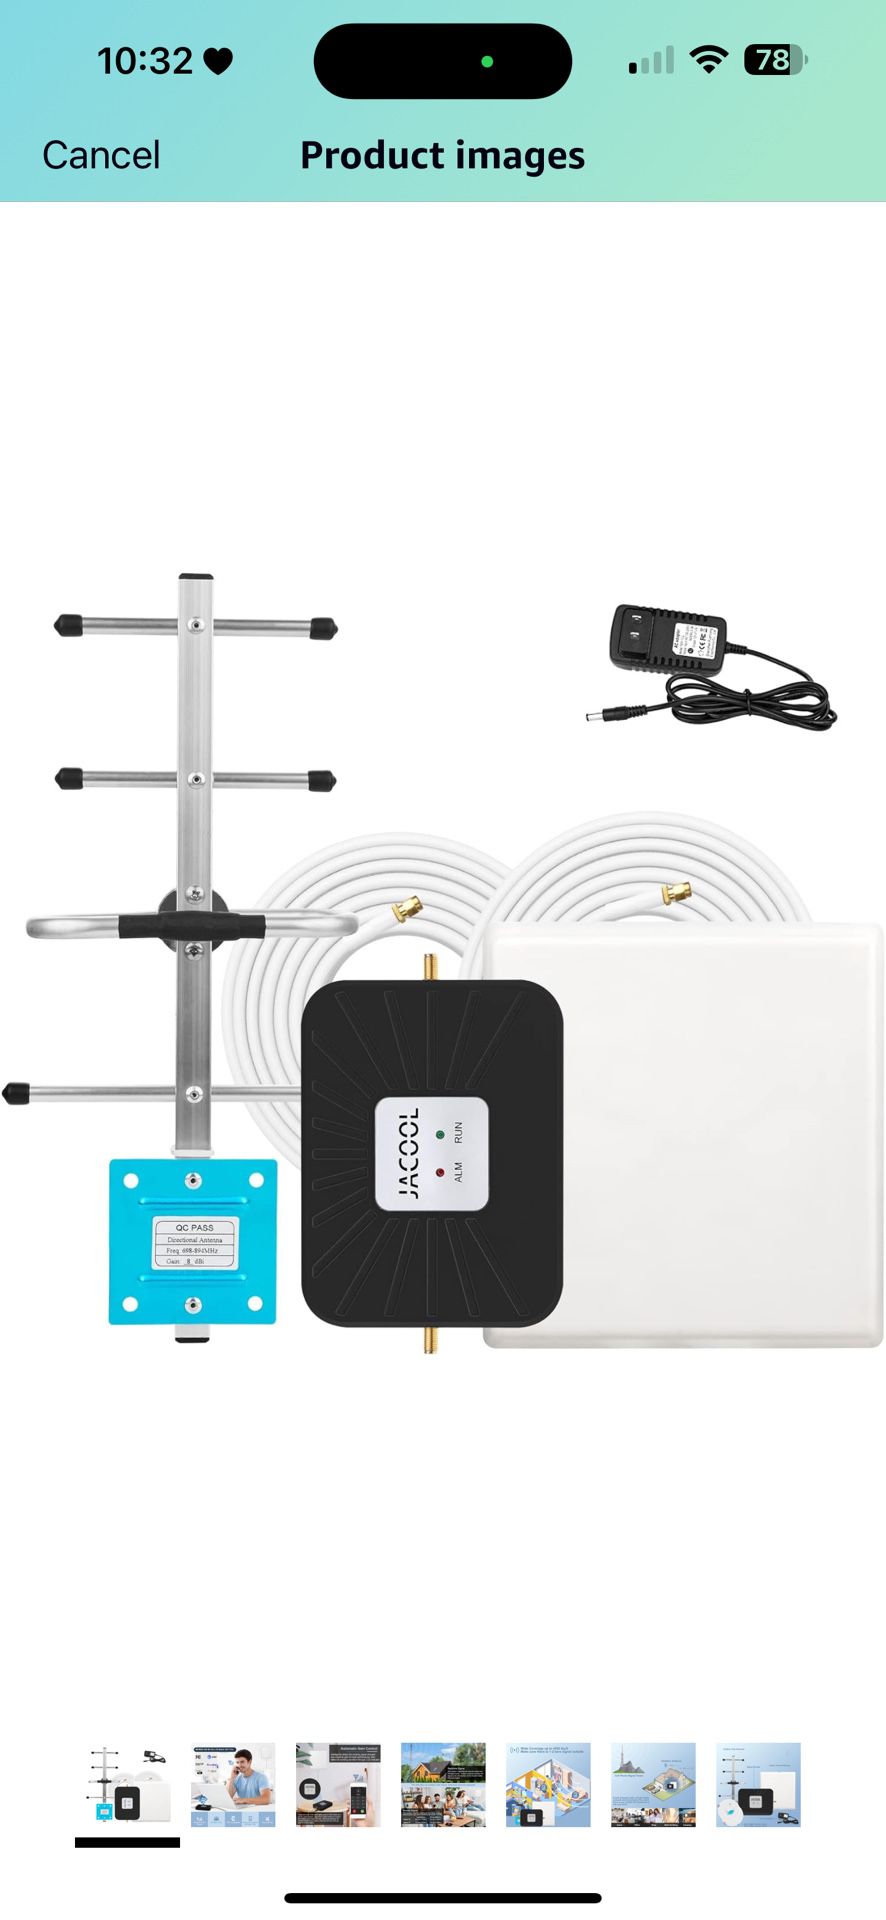 AT&T Signal Booster AT&T Cell Phone Signal Booster T Mobile 5G 4G LTE Band12/17 AT&T Cell Booster AT&T Cell Phone Booster for Home, Cell Booster Anten